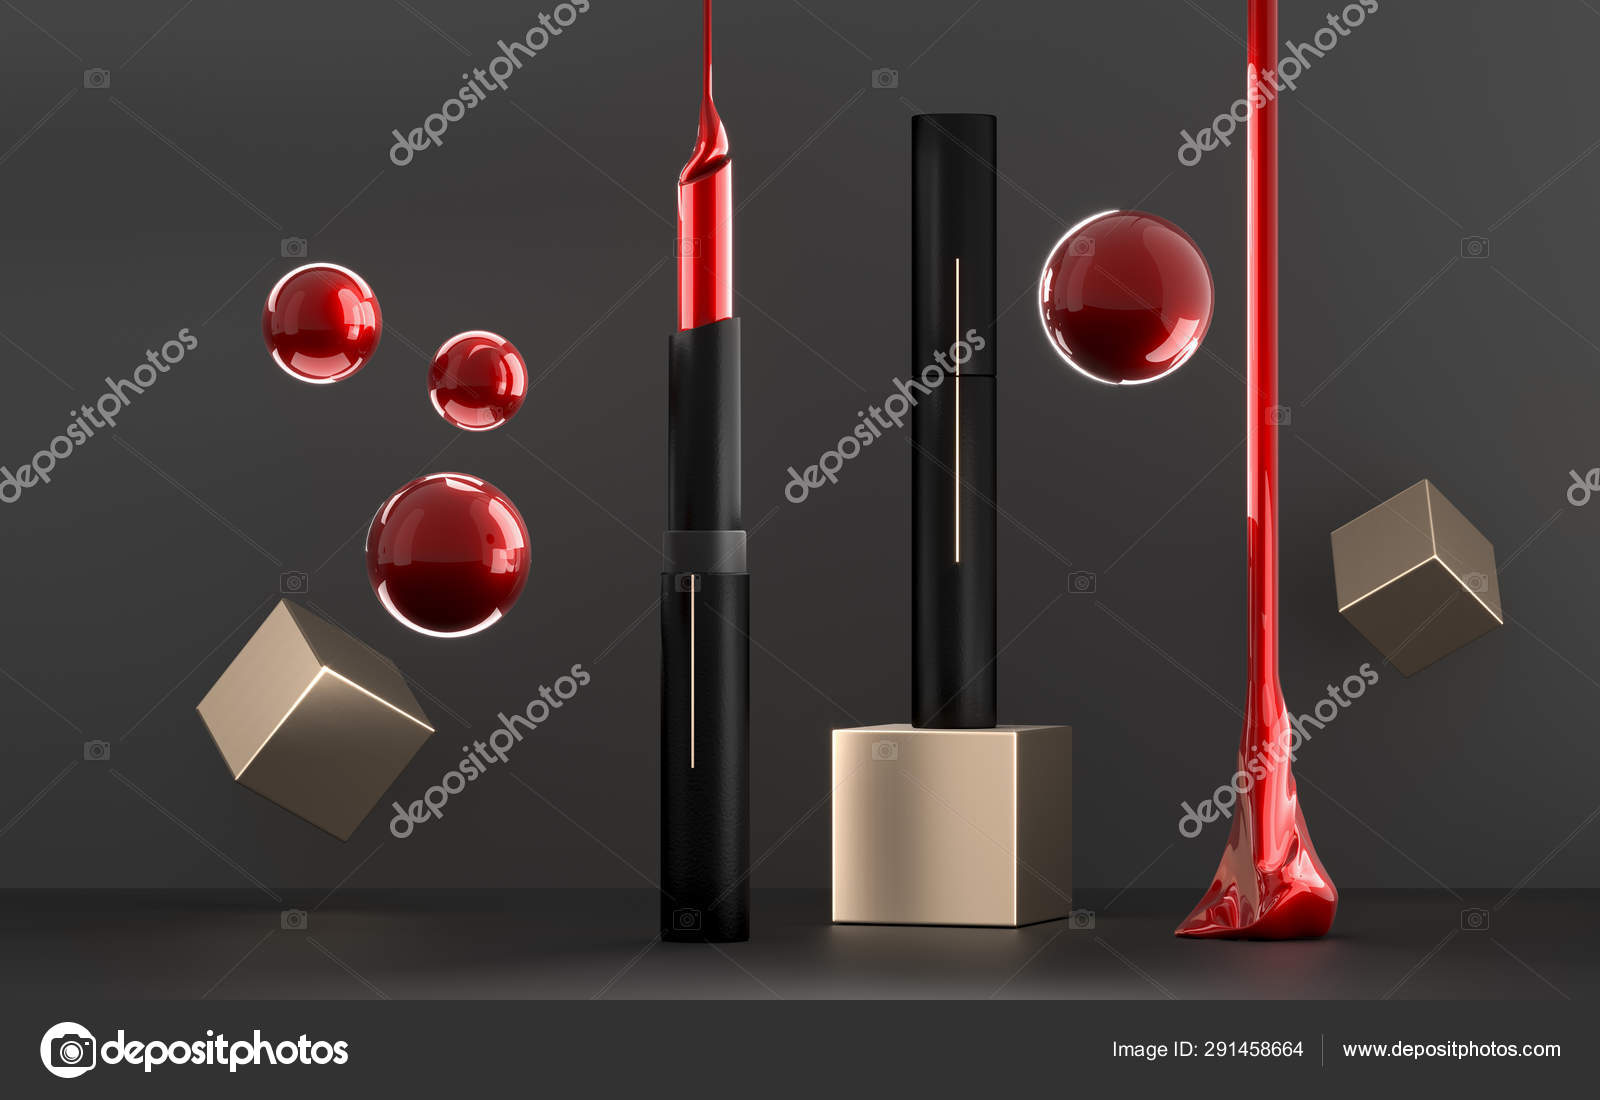 Download Makeup Ads Template Fashion Lipstick Cosmetics Make Up Beauty Product Charming Red Lipstick Mock Up With Black And Gold Background Trendy Cosmetic Design 3d Illustration Stock Photo Image By C Volmon Tut By